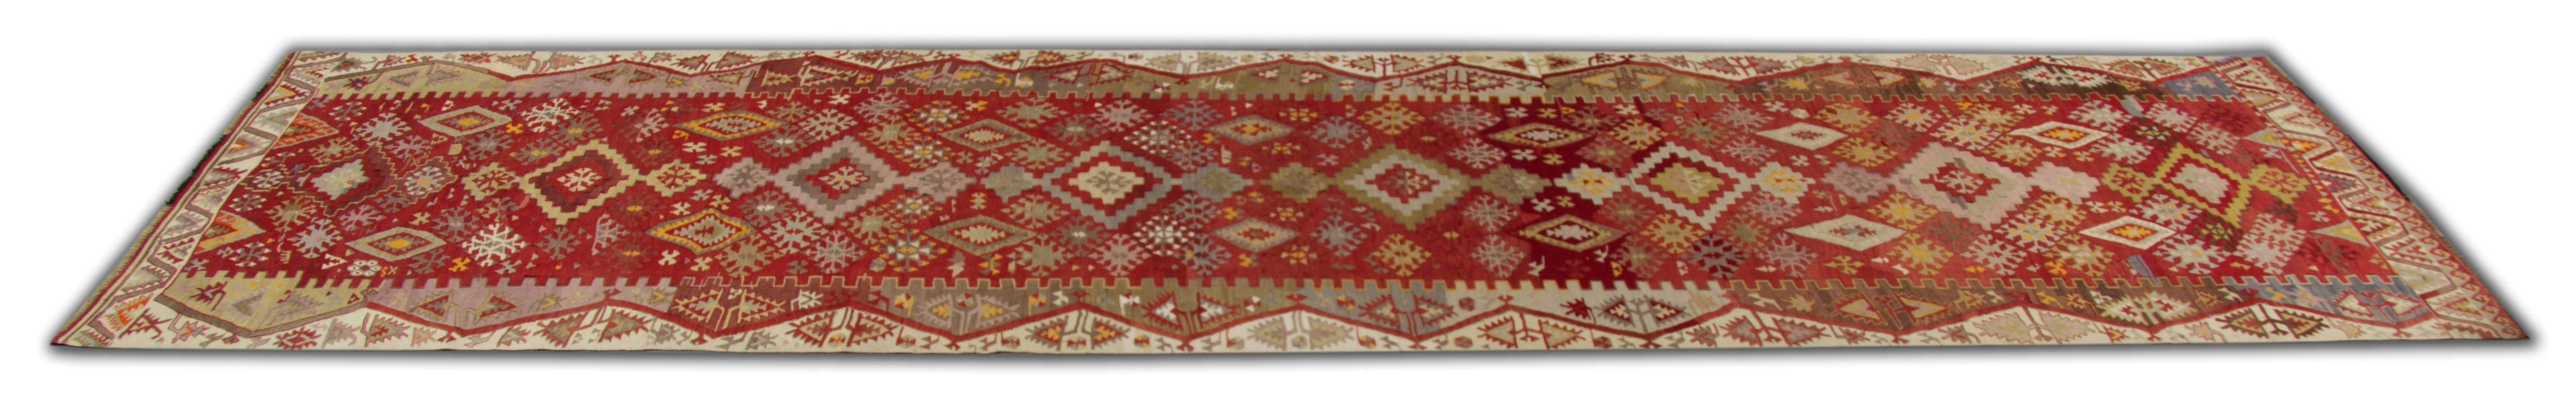 Konya is located in the heart of Turkey, workshop Long Kilims of Konya are mostly known for their distinctive geometric designs. Turkish patterned rugs are popular with their hardwearing and durable qualities. These handmade carpet runners are one